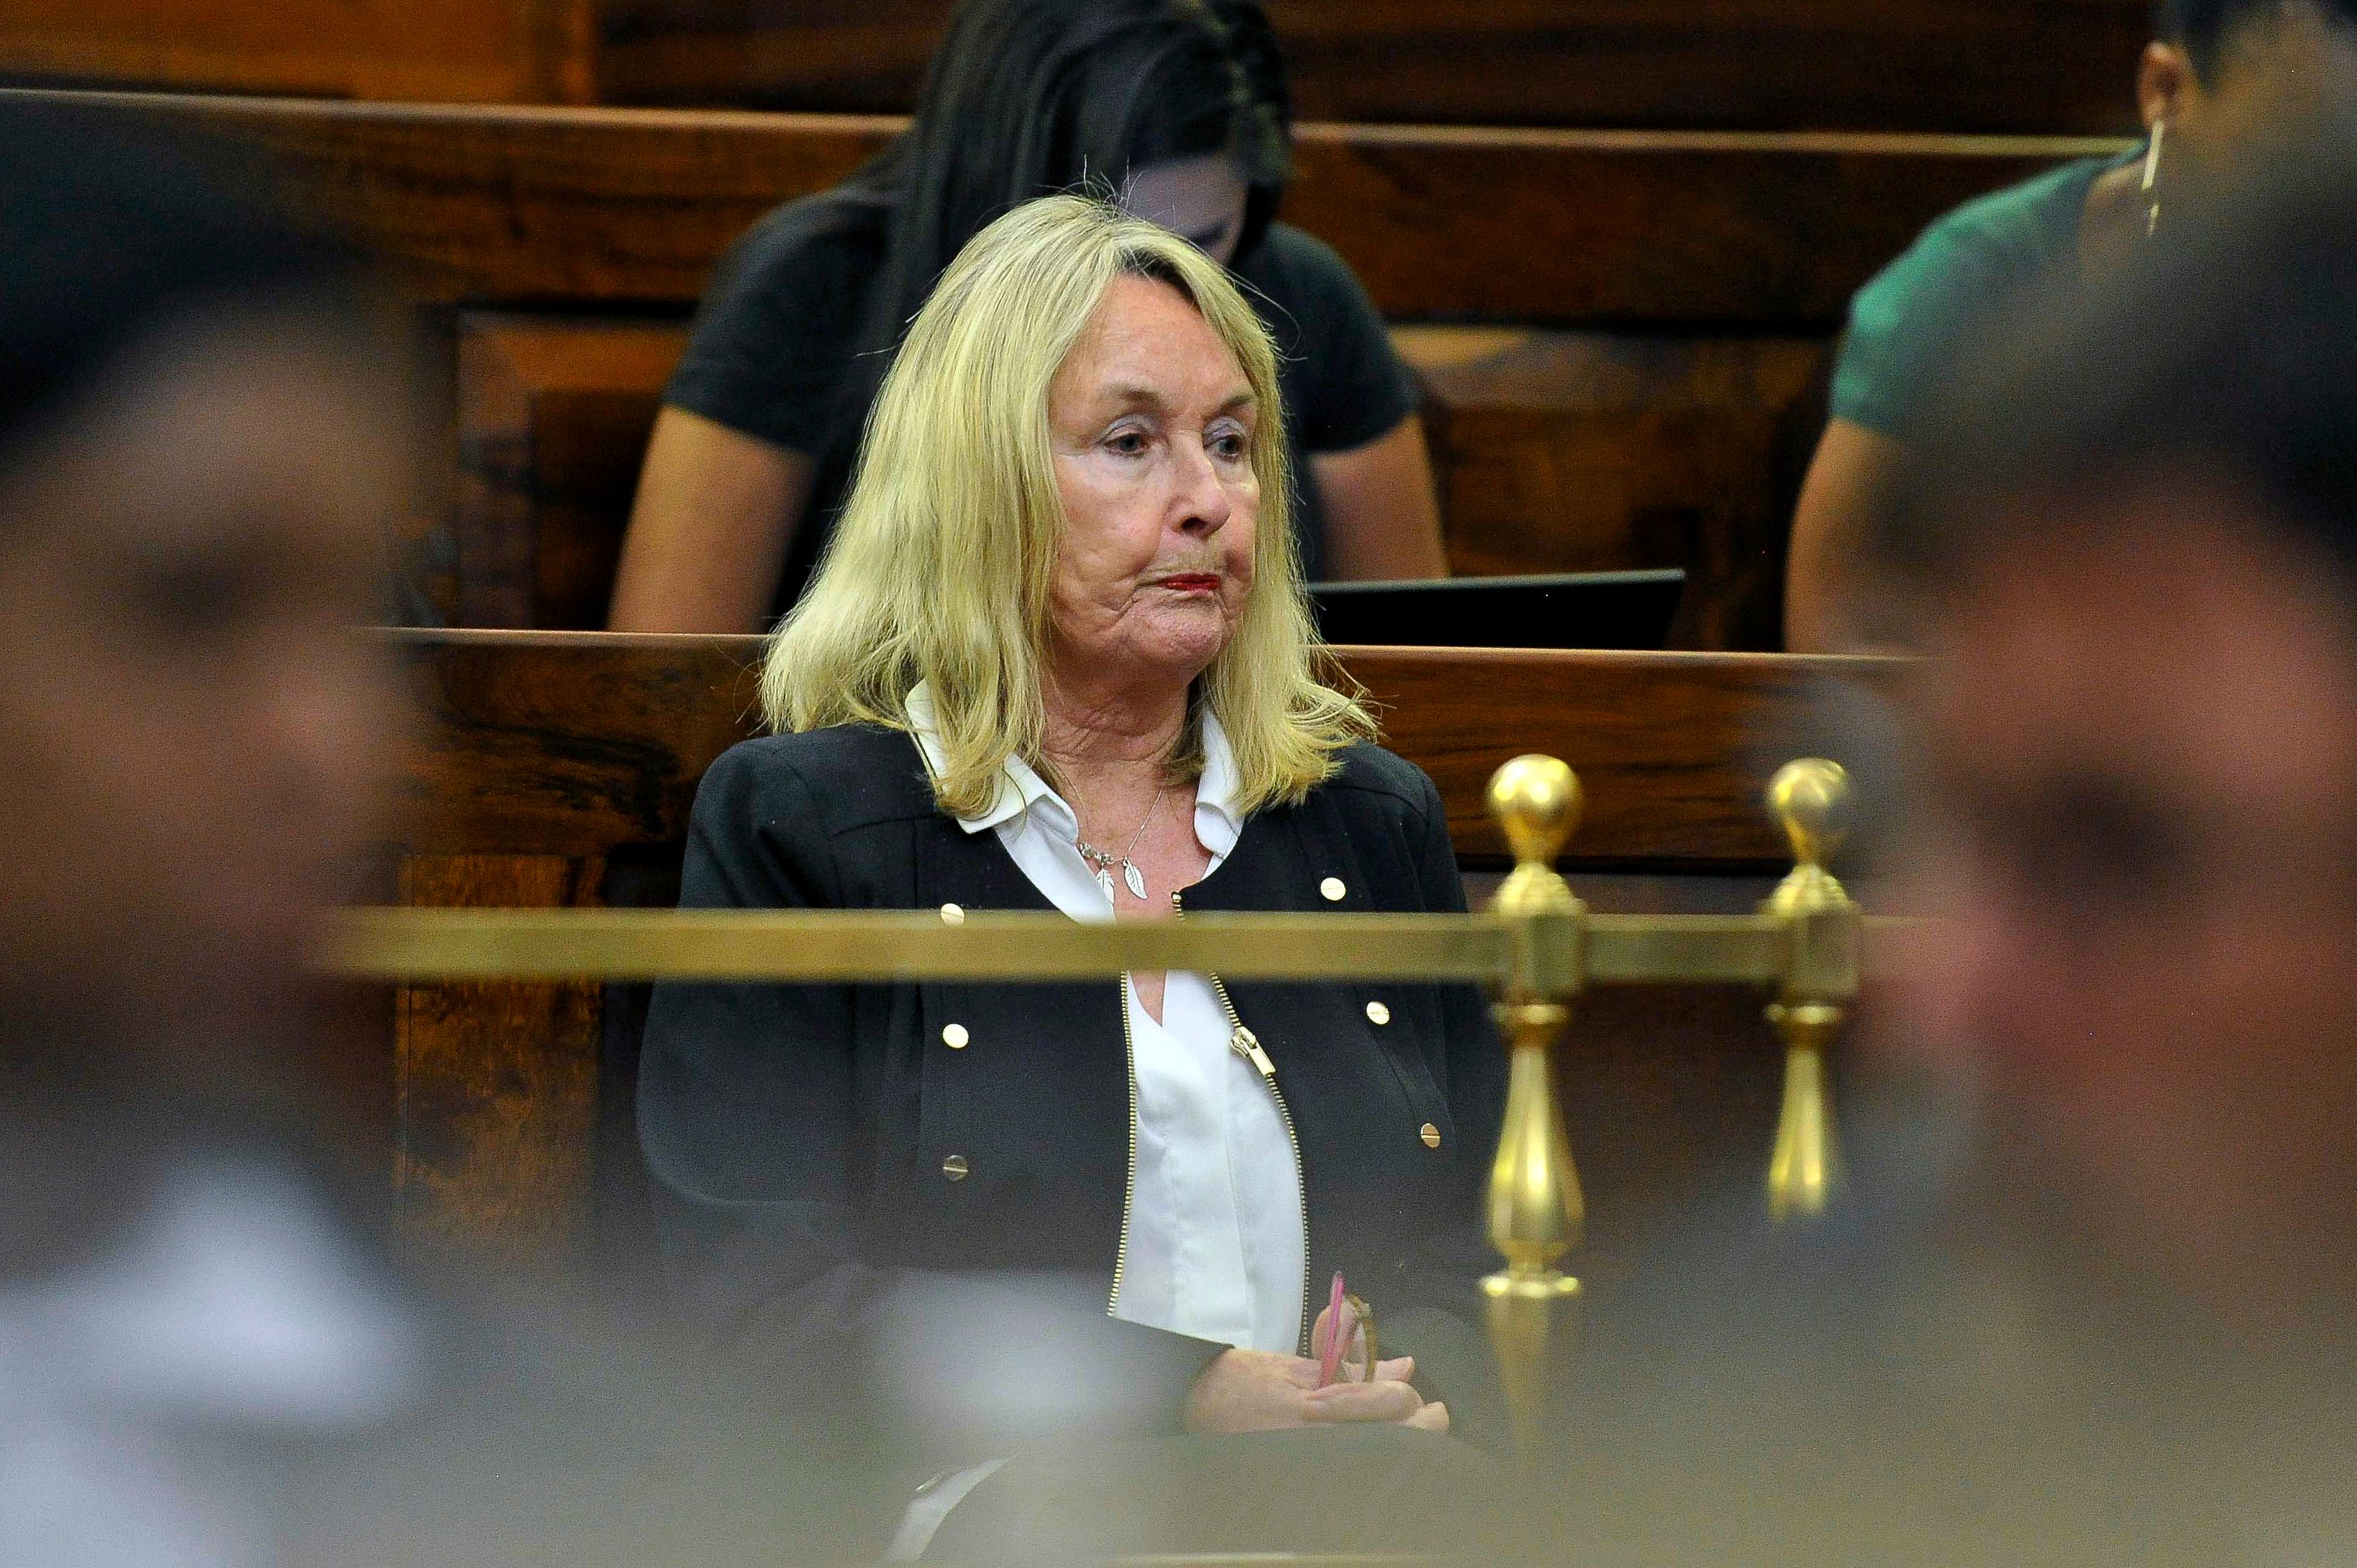 June Steenkamp, Reeva’s mother, is not opposing the parole hearing - a boost for Pistorius’ case